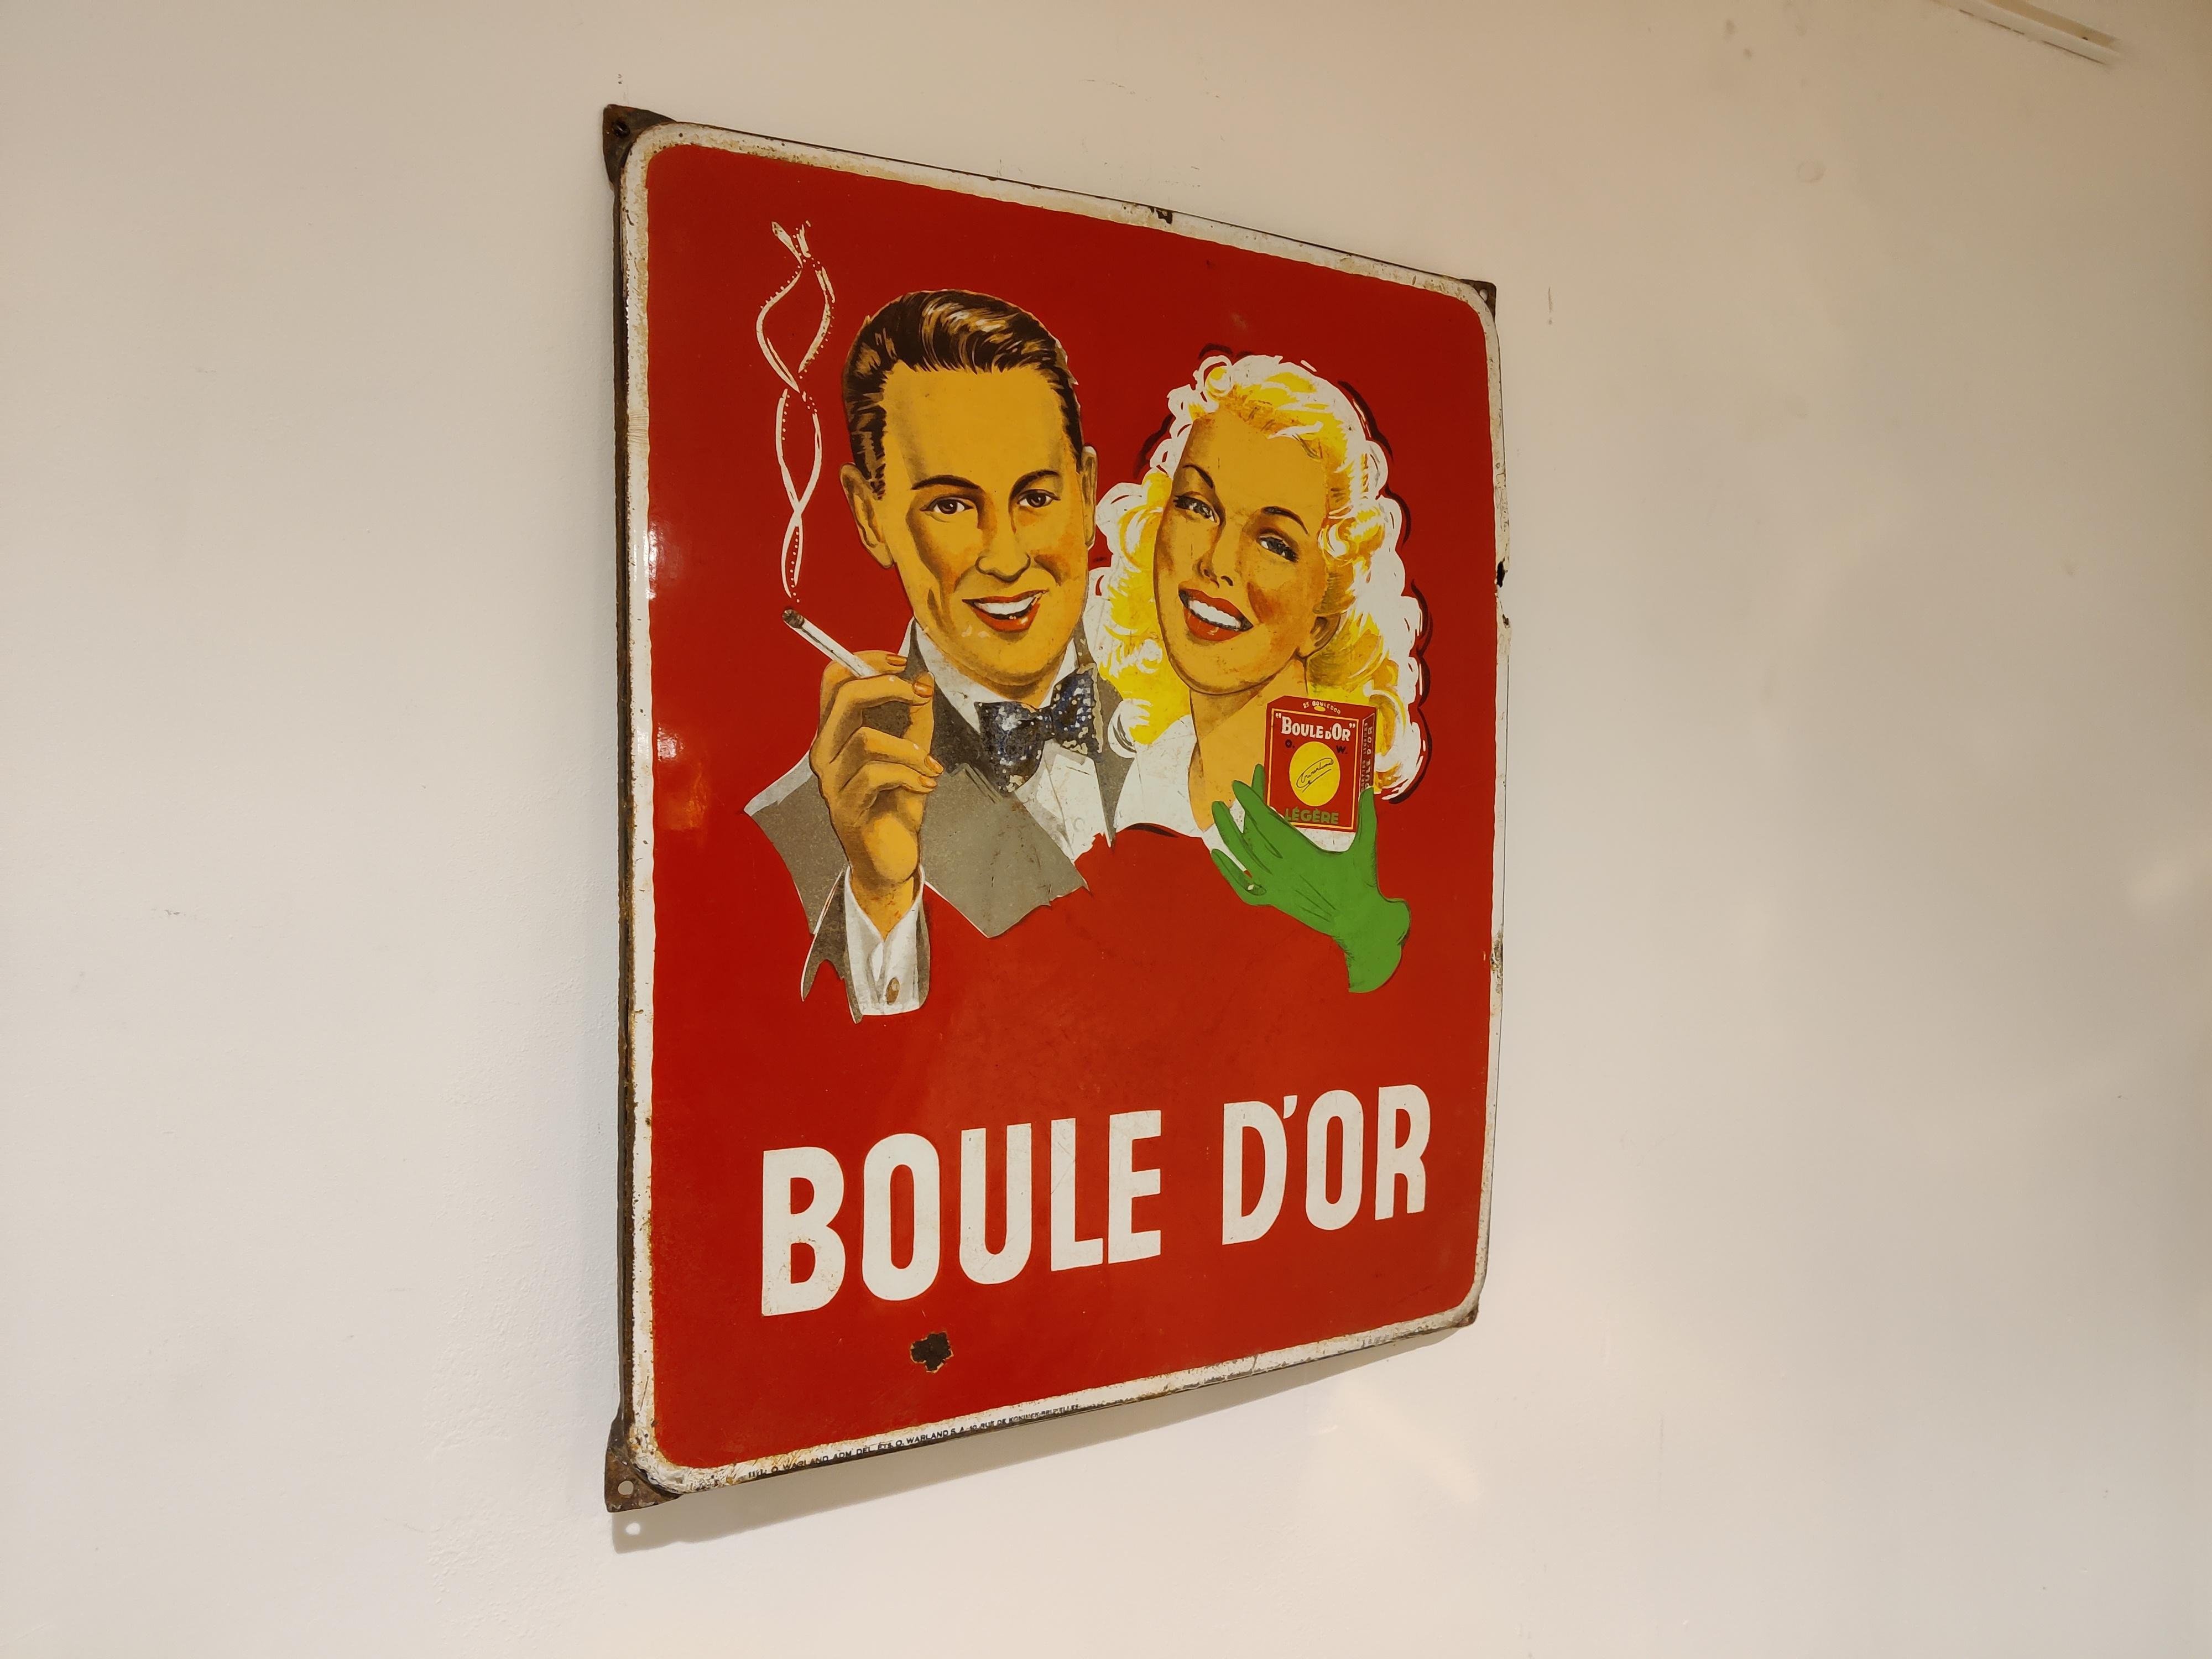 Charming enamel publicity sign by Boule d'or.

Dated 1953

All 4 holes are intact, so can be hung without problems.

Normal age related wear to the panel, nothing has been refurbished.

Measures: Height: 66cm/25.98